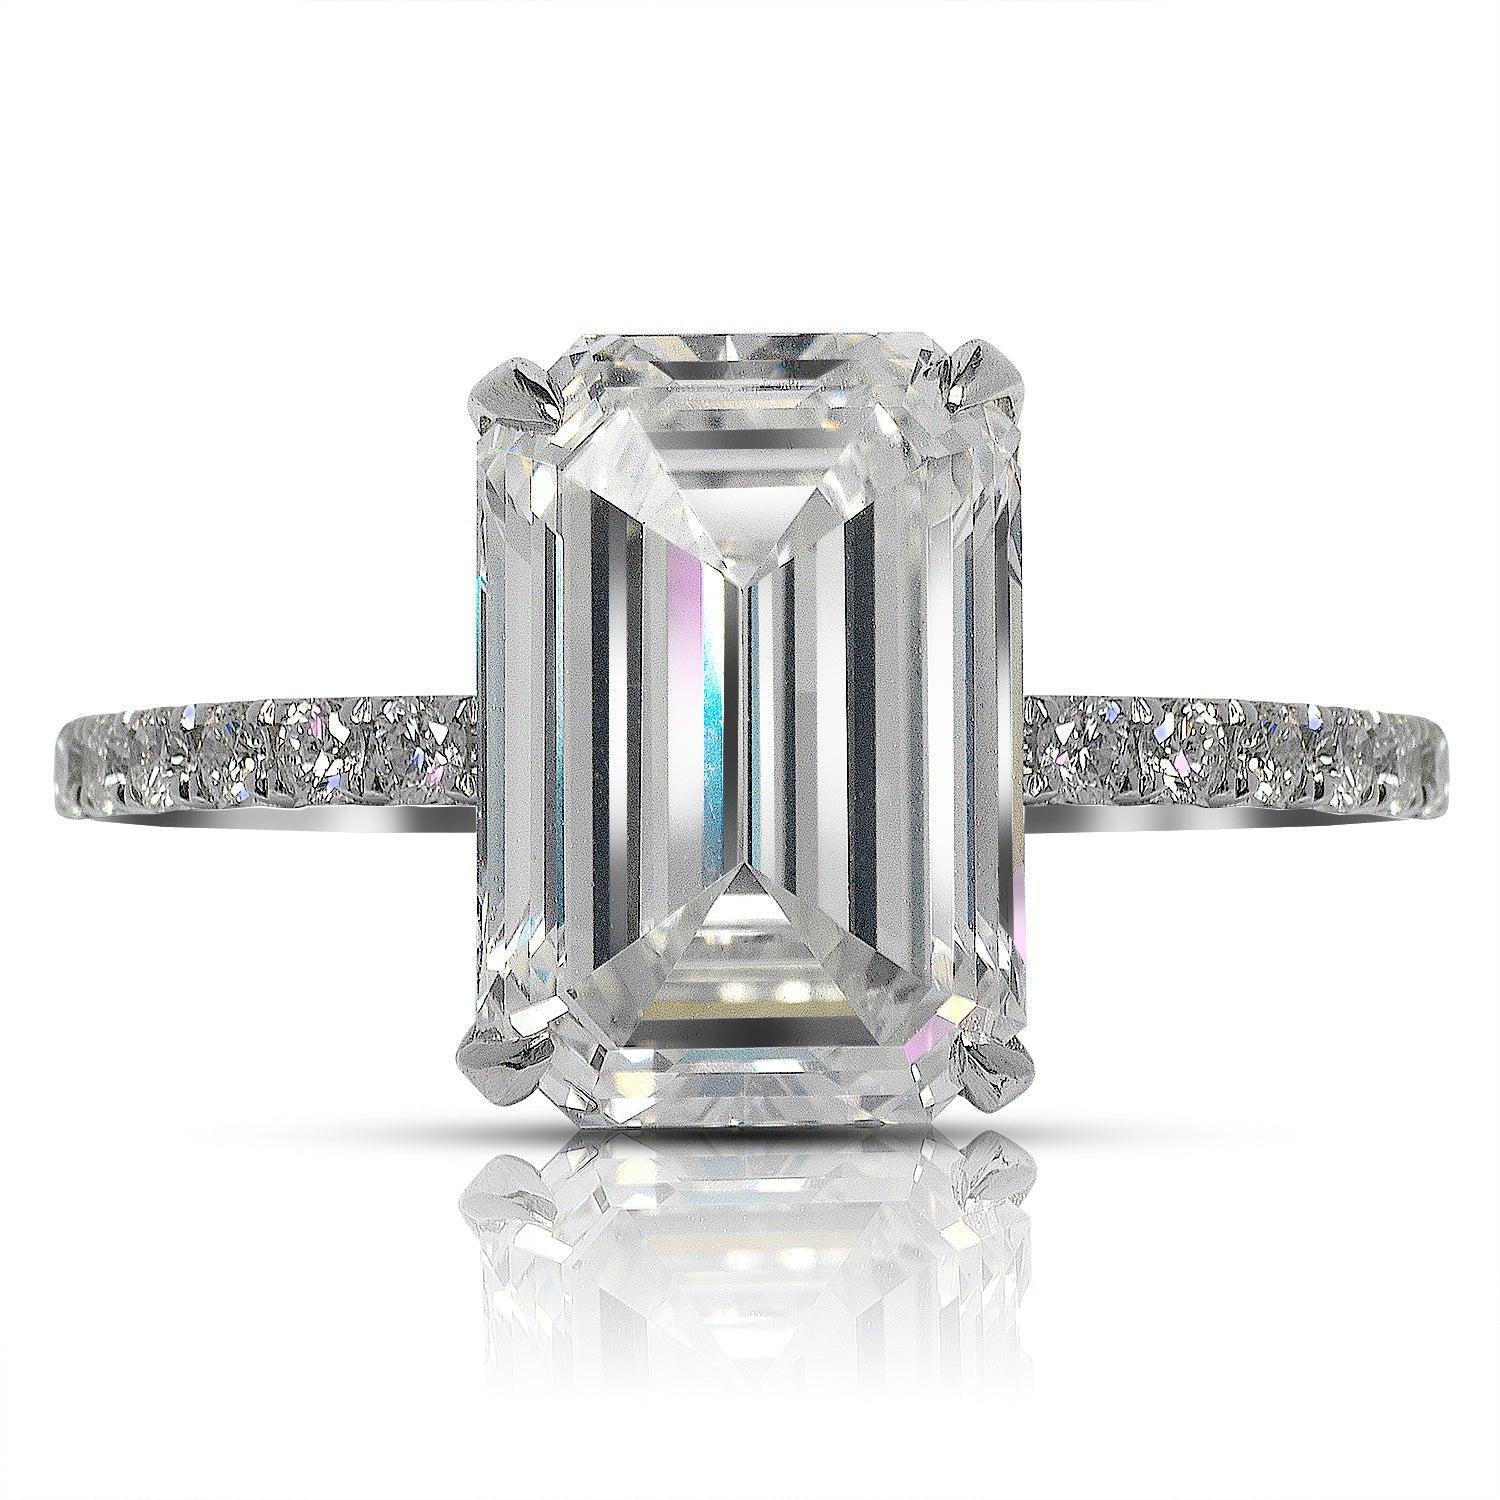 RONI EMERALD CUT  DIAMOND ENGAGEMENT RING PLATINUM
GIA CERTIFIED
 
Center Diamond
Carat Weight: 5.10 Carats
Color :   I*
Clarity:  VVS2
Cut: EMERALD CUT
Measurements: 12.2 x 8.46 x 5.0 mm
*Color Treated
 
Ring:
Metal: PLATINUM
Style: 4 PRONG